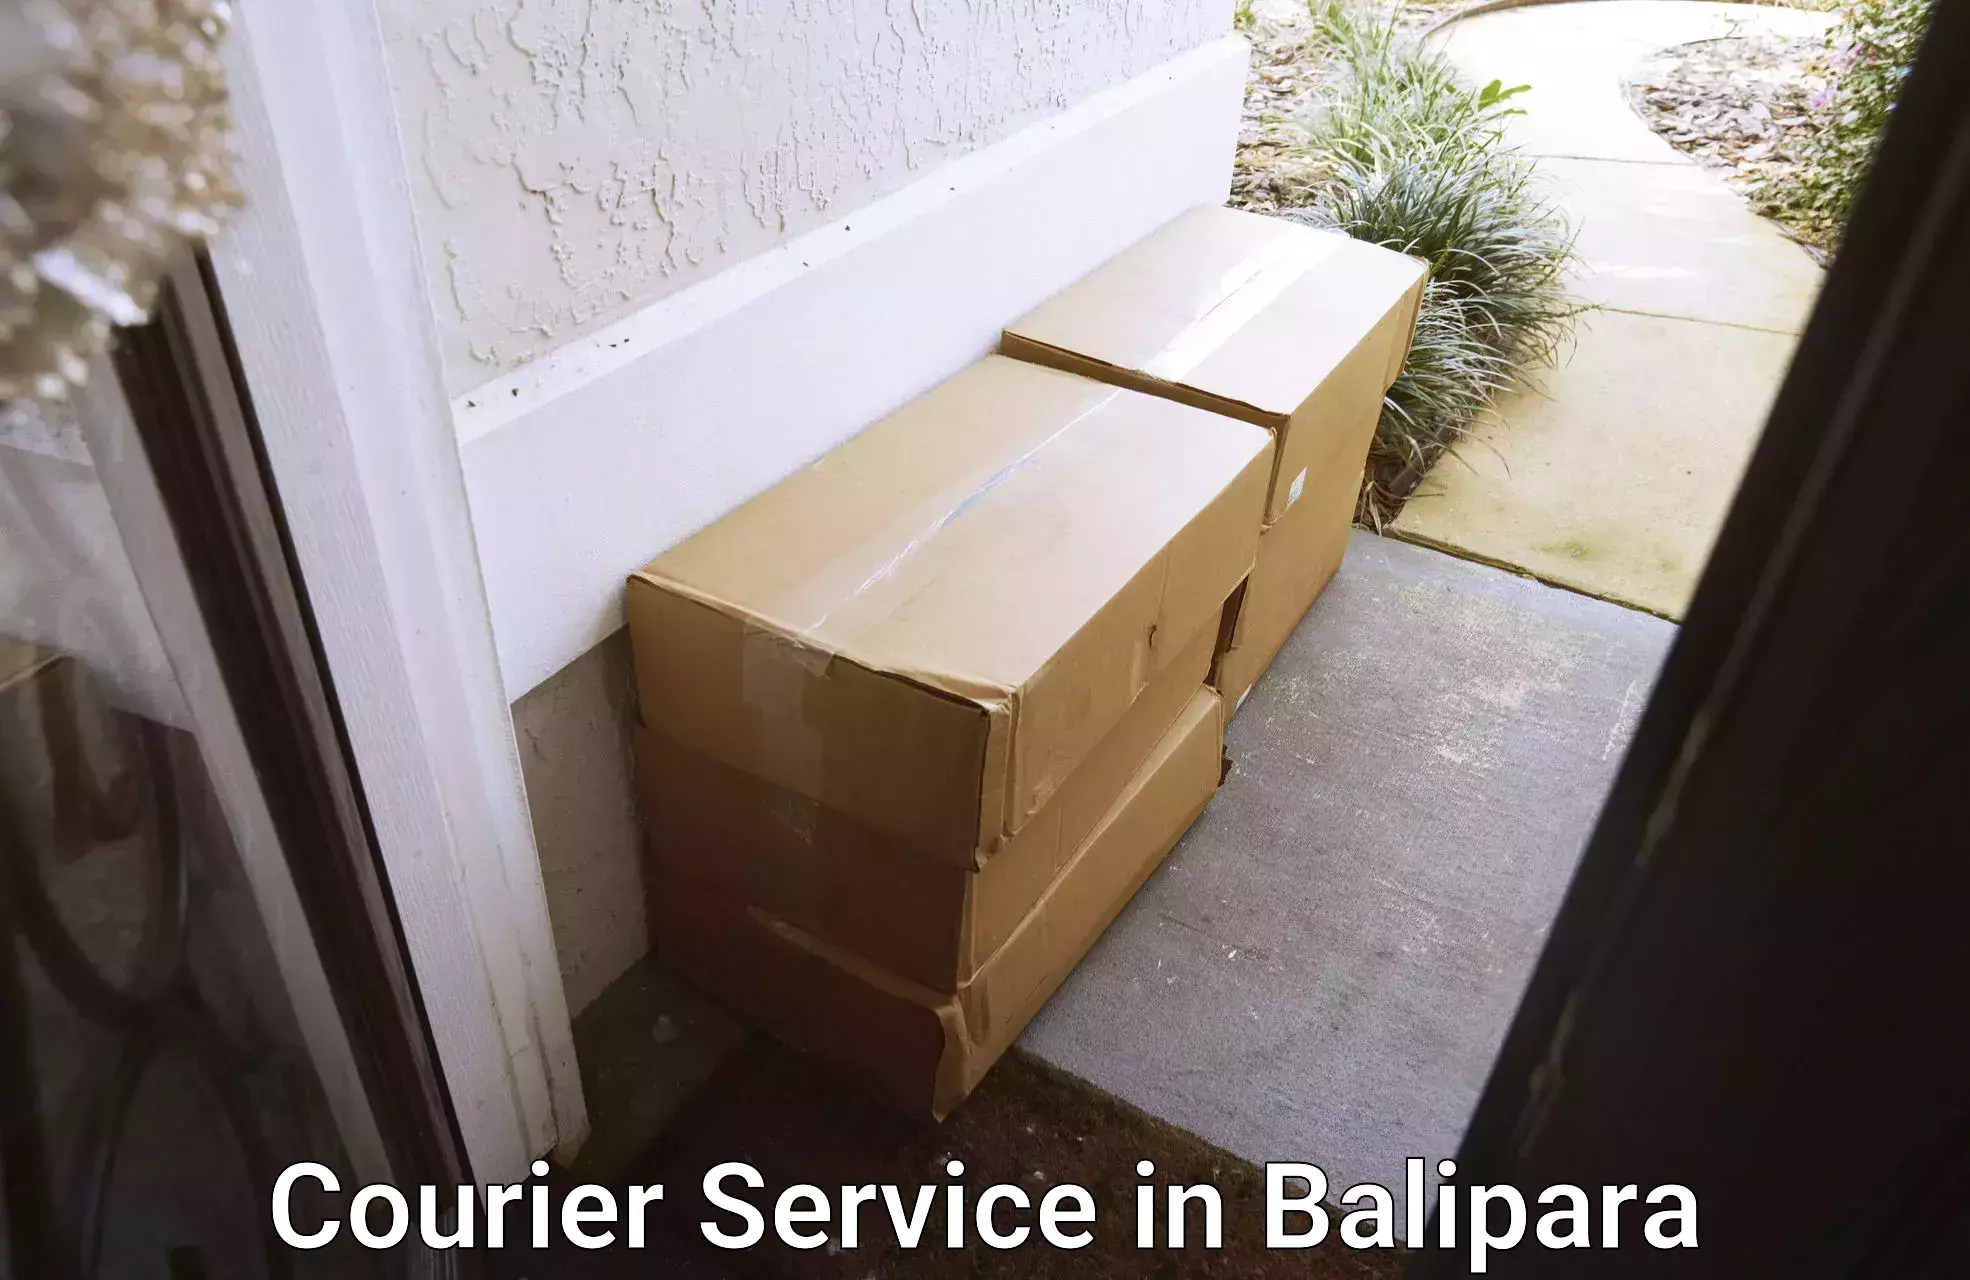 Premium courier services in Balipara